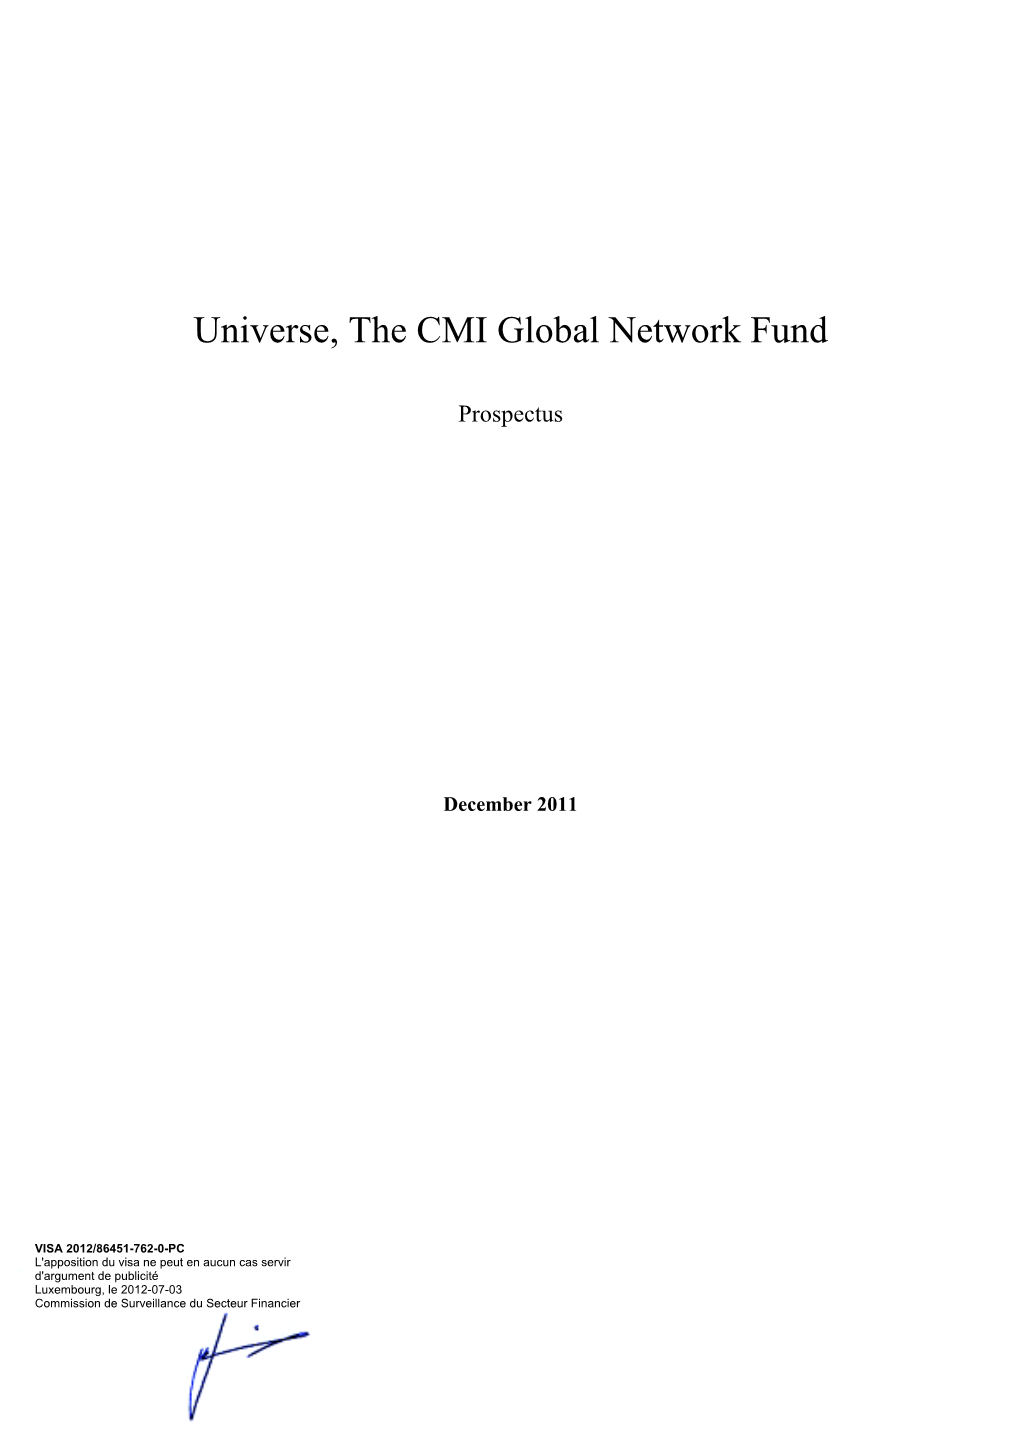 Universe, the CMI Global Network Fund